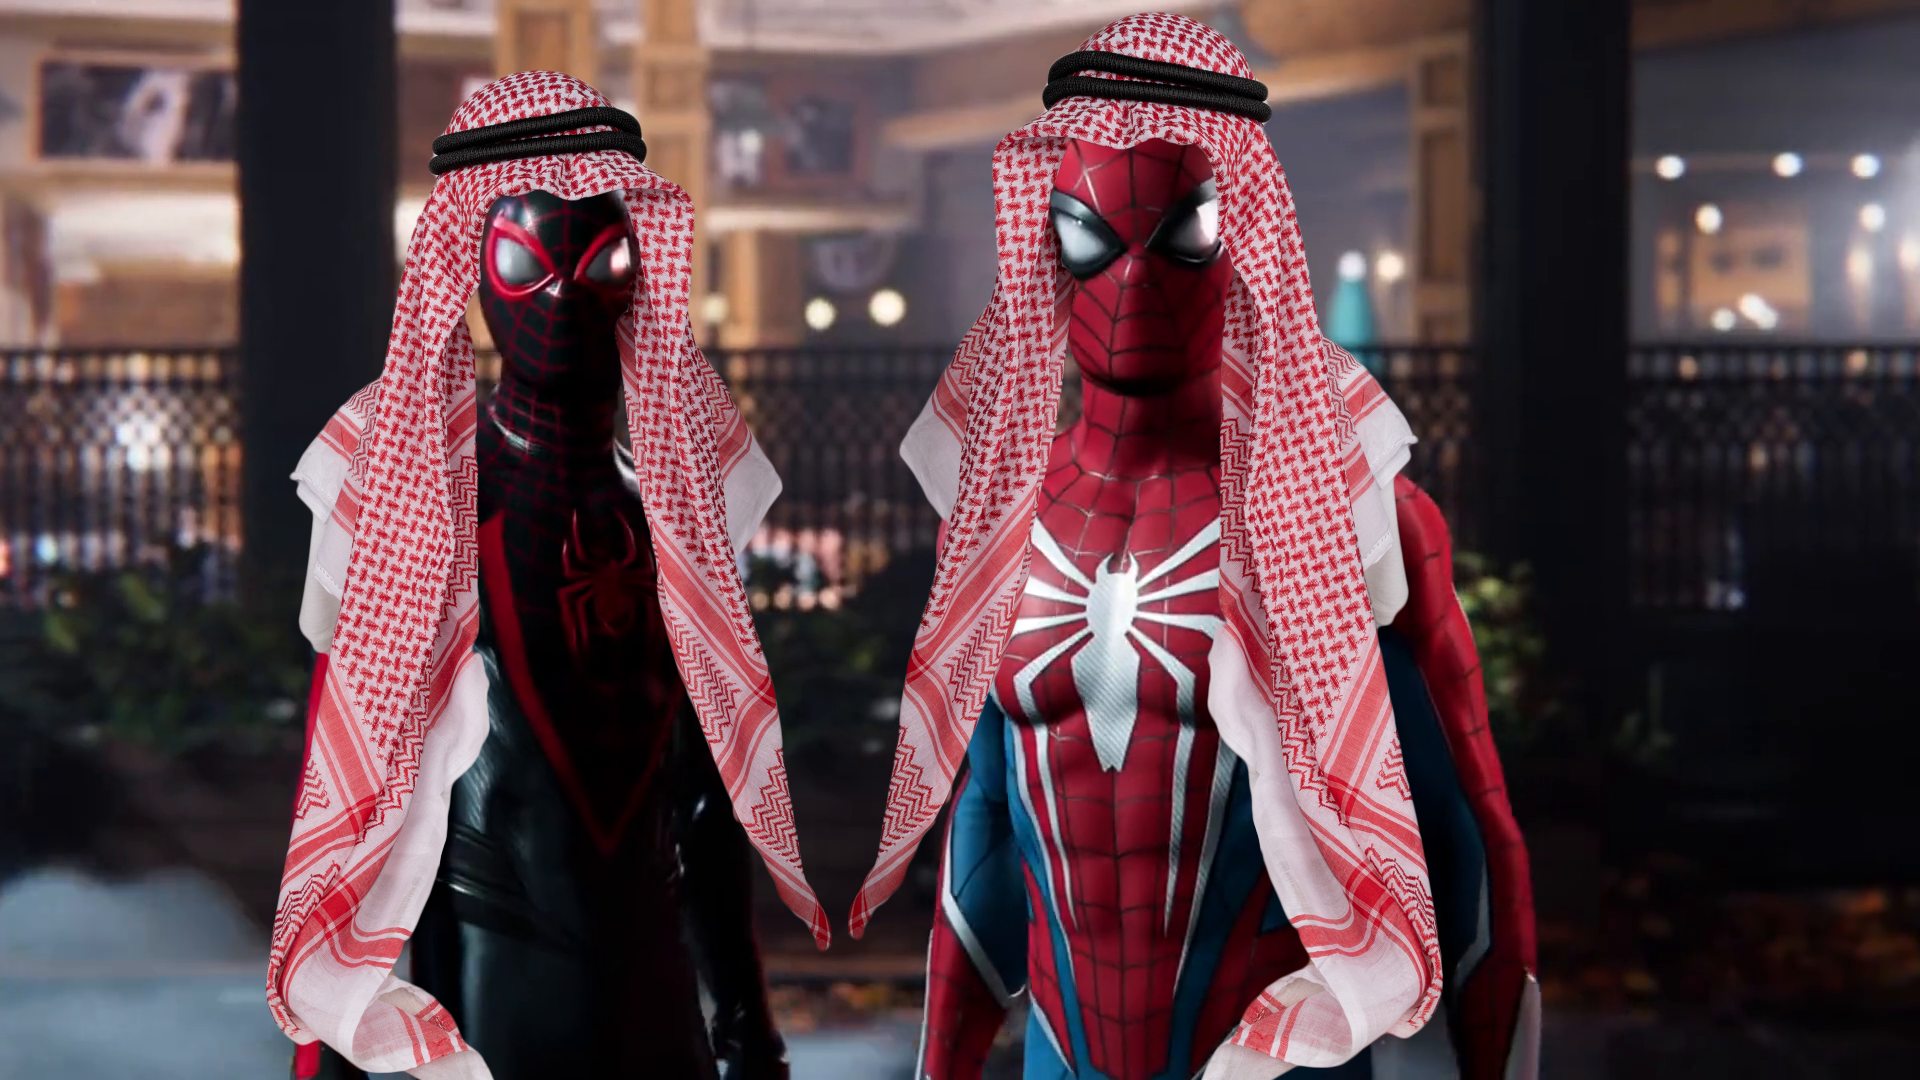 It looks like Spider-Man 2 could be banned or delayed in the Middle East